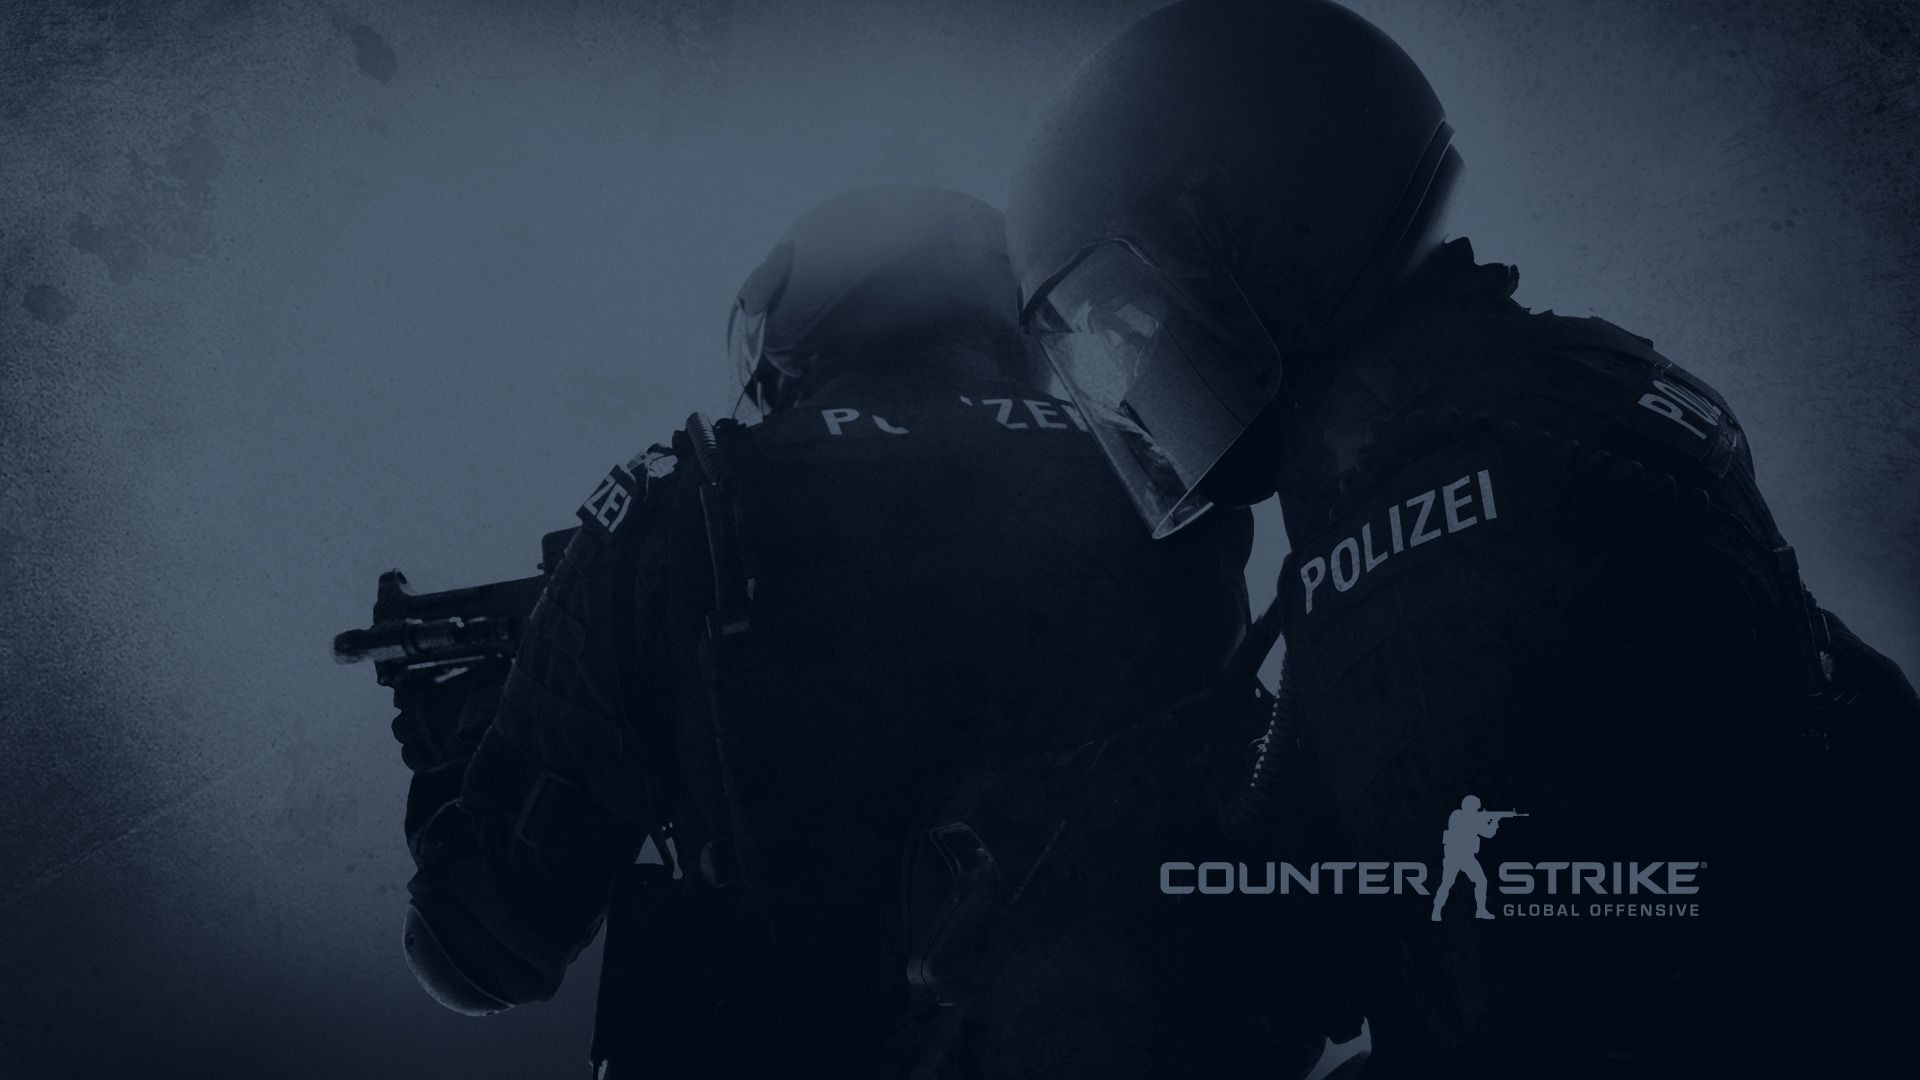 Counter Strike: Global Offensive Wallpaper HD Gallery | Game